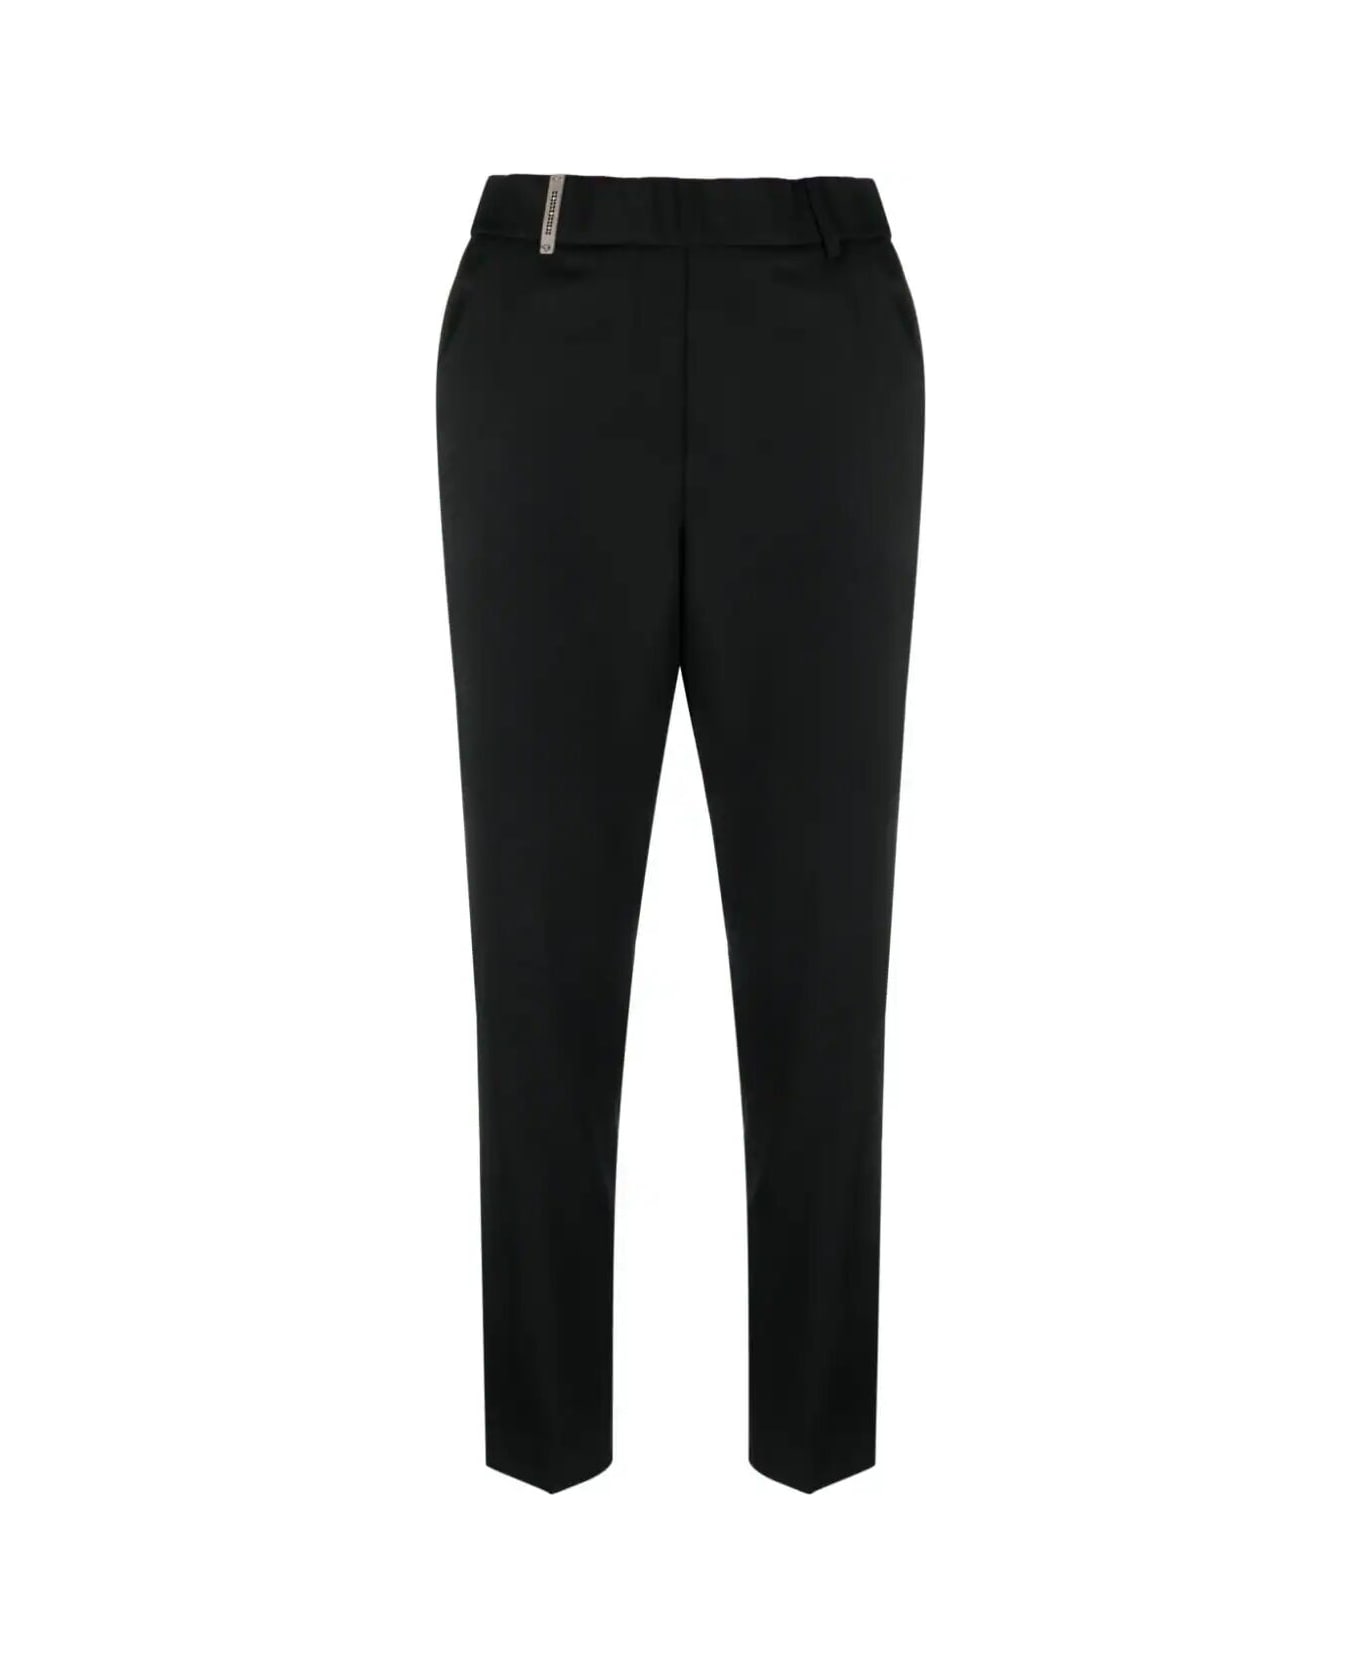 Peserico Flannel Stretch Trousers - Black